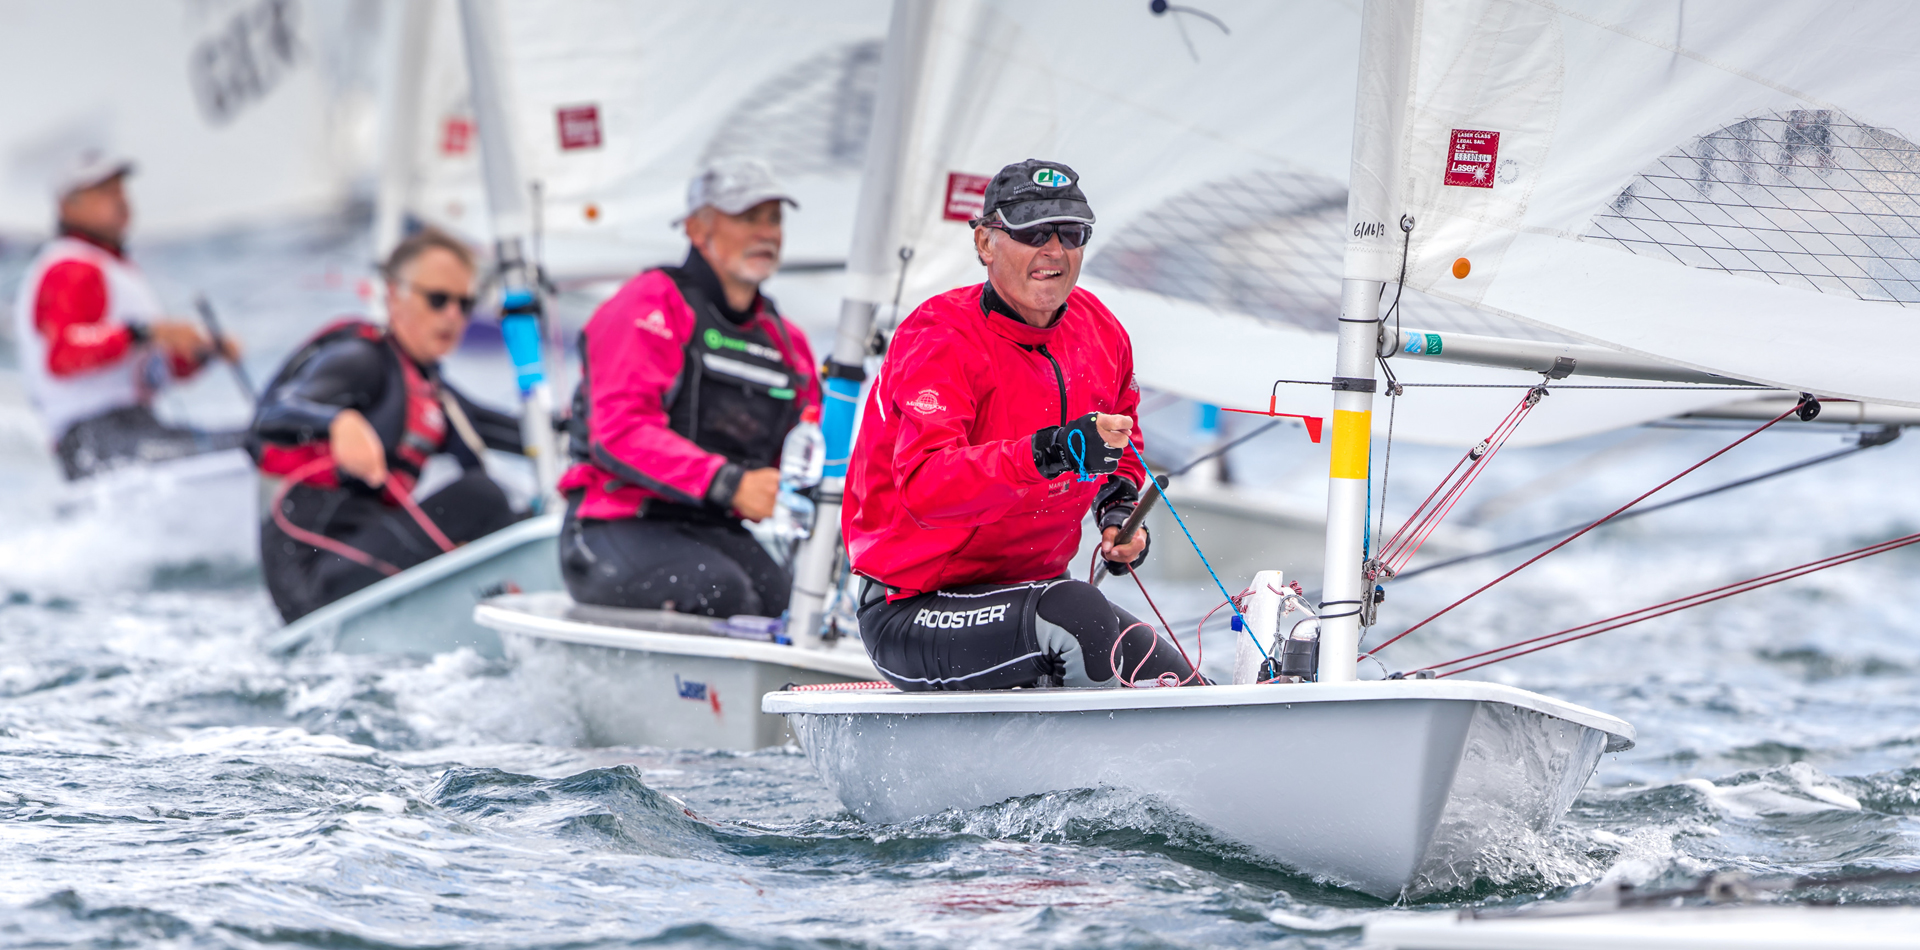 Masters Racing in the ILCA Class